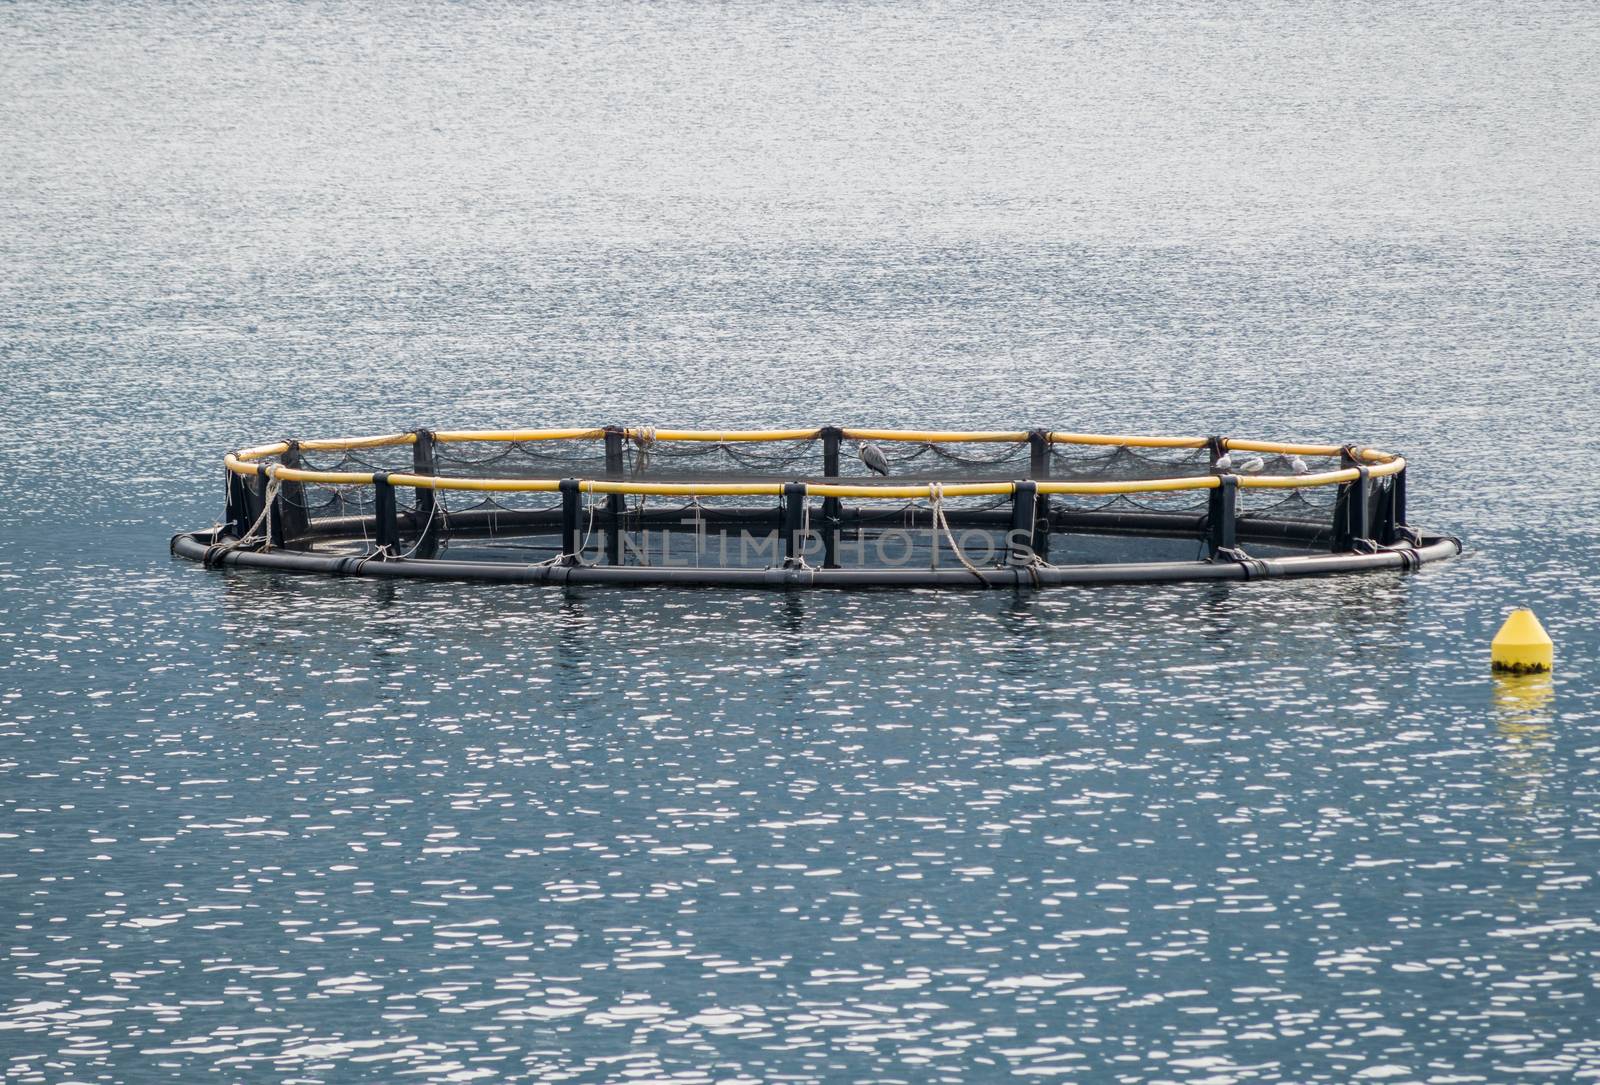 Cages for fish farming and the boat by radzonimo